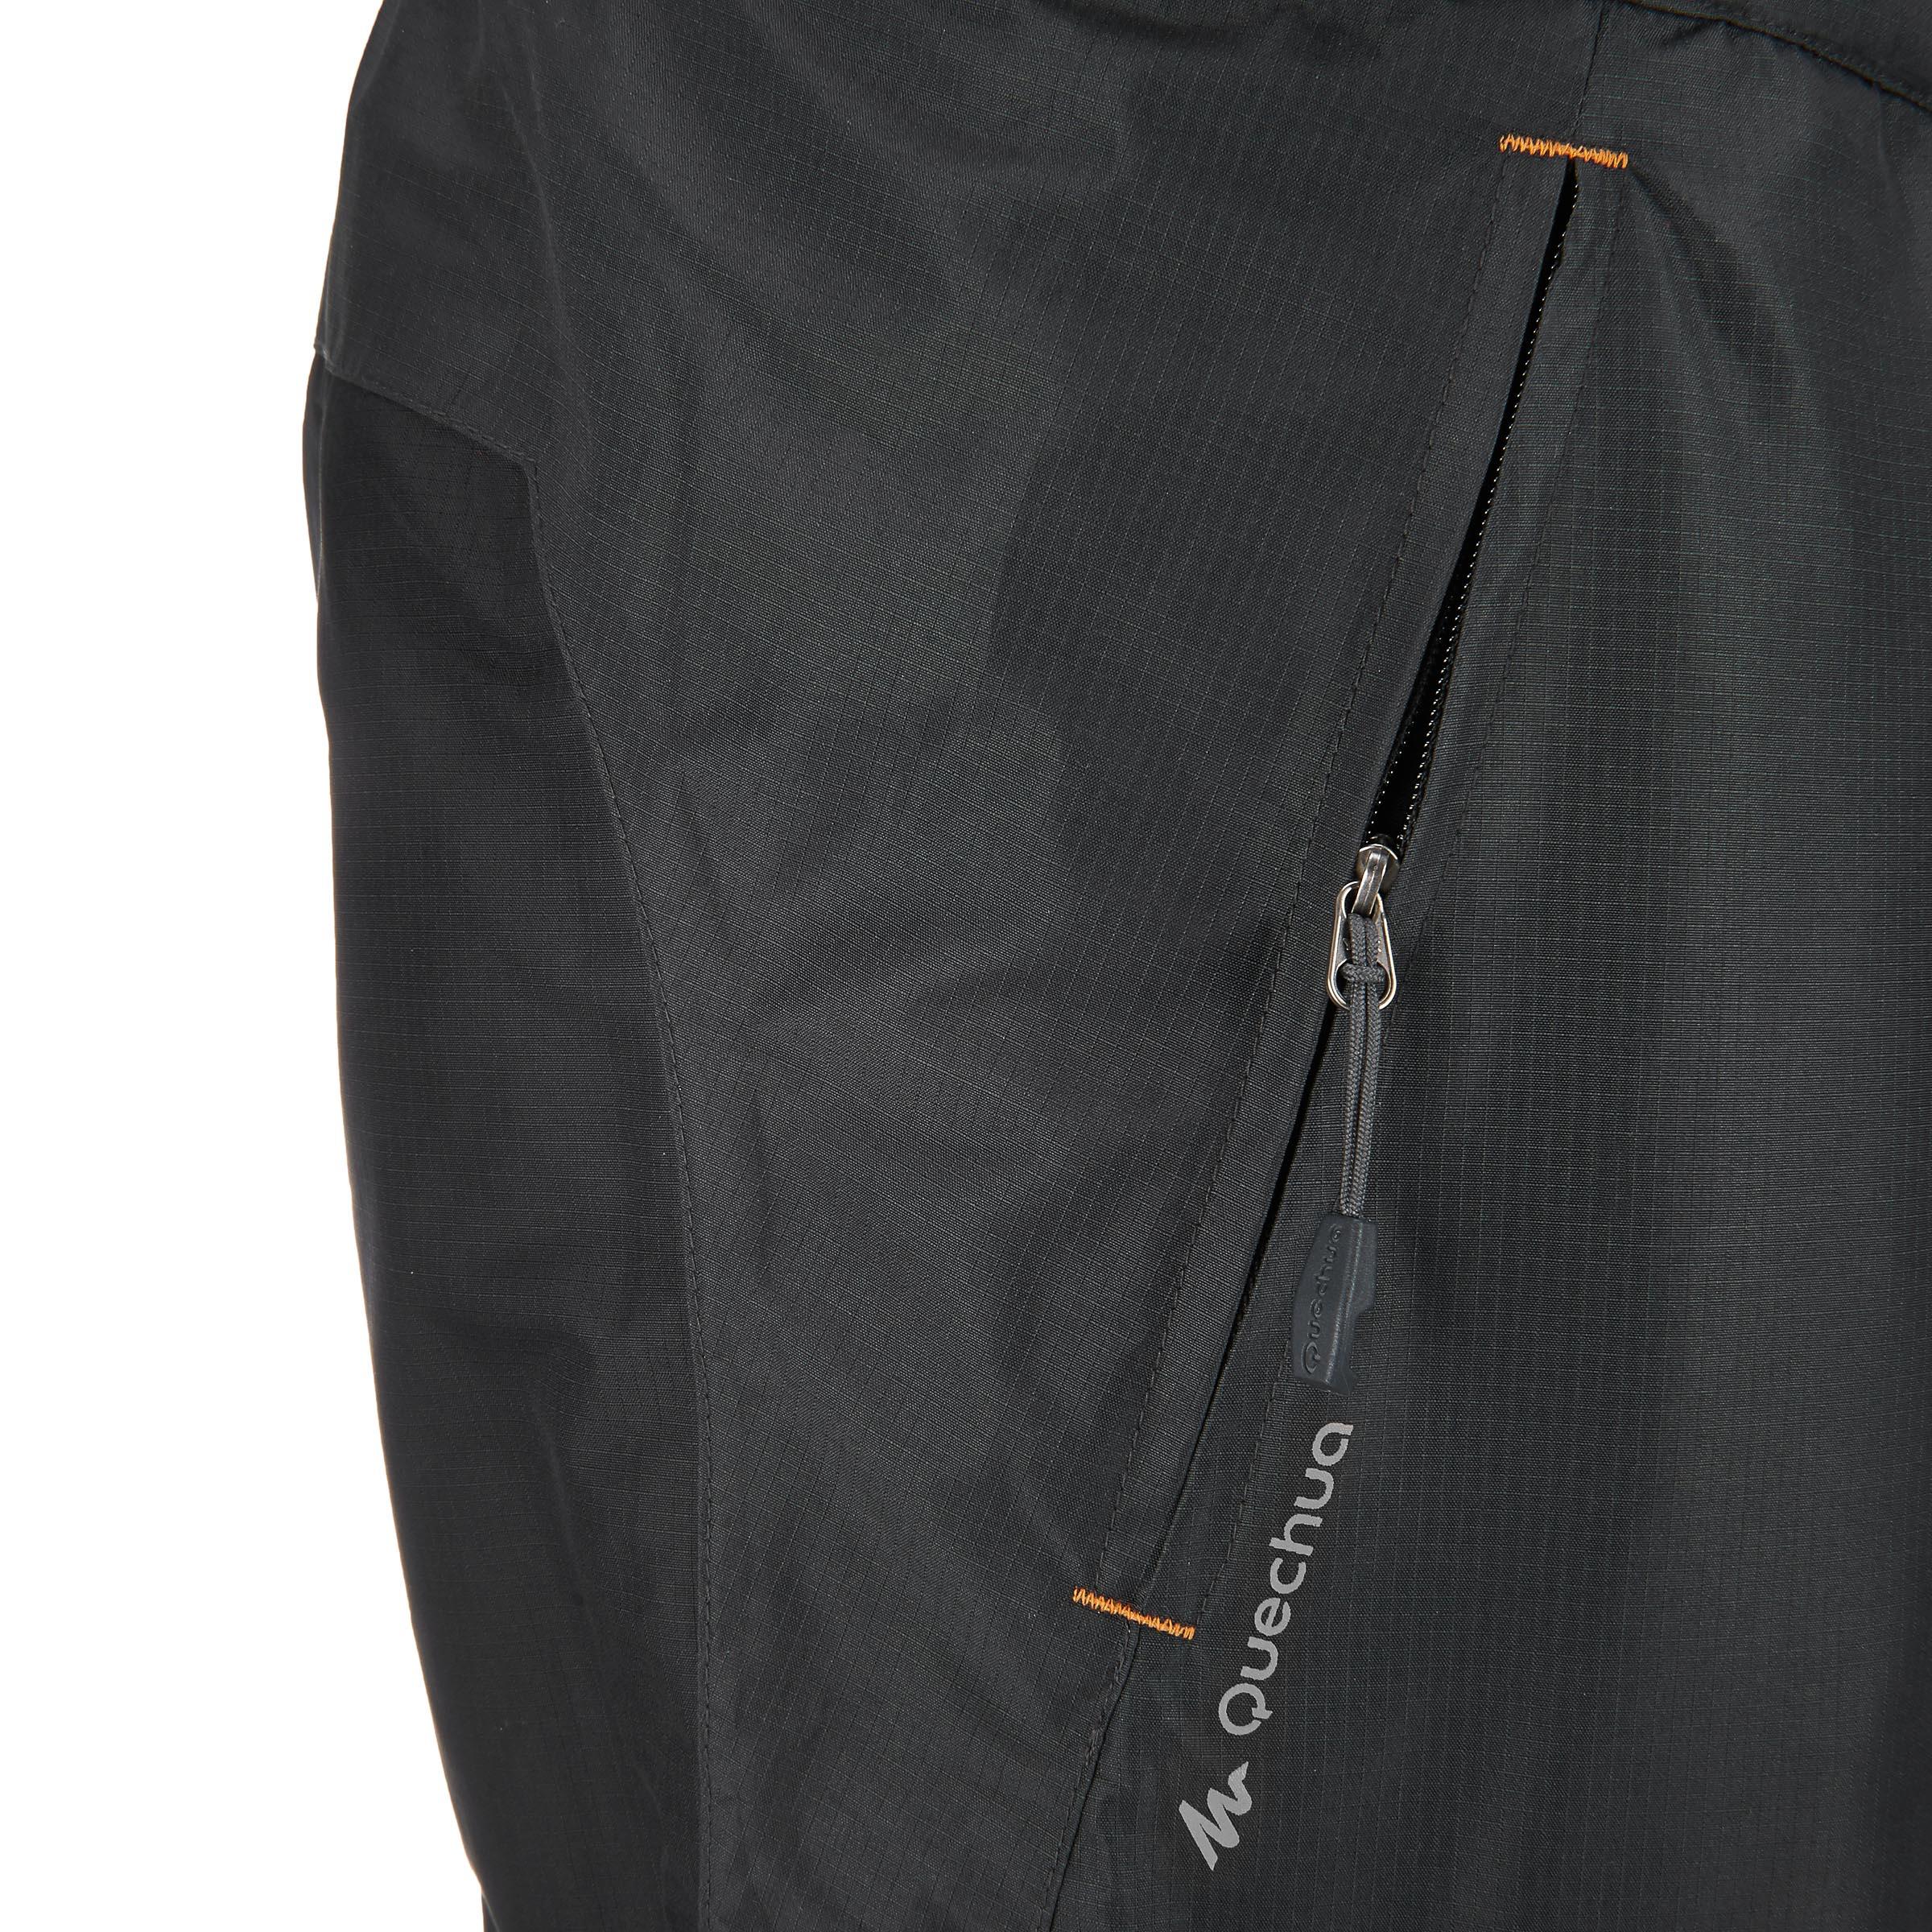 Men's Rain Pants NH500 Hiking Over-Trousers - Black | An added bonus in  case of rain!☔🌨Looking for an easy foldable rain wear, we got a solution  for you. This rainy season we